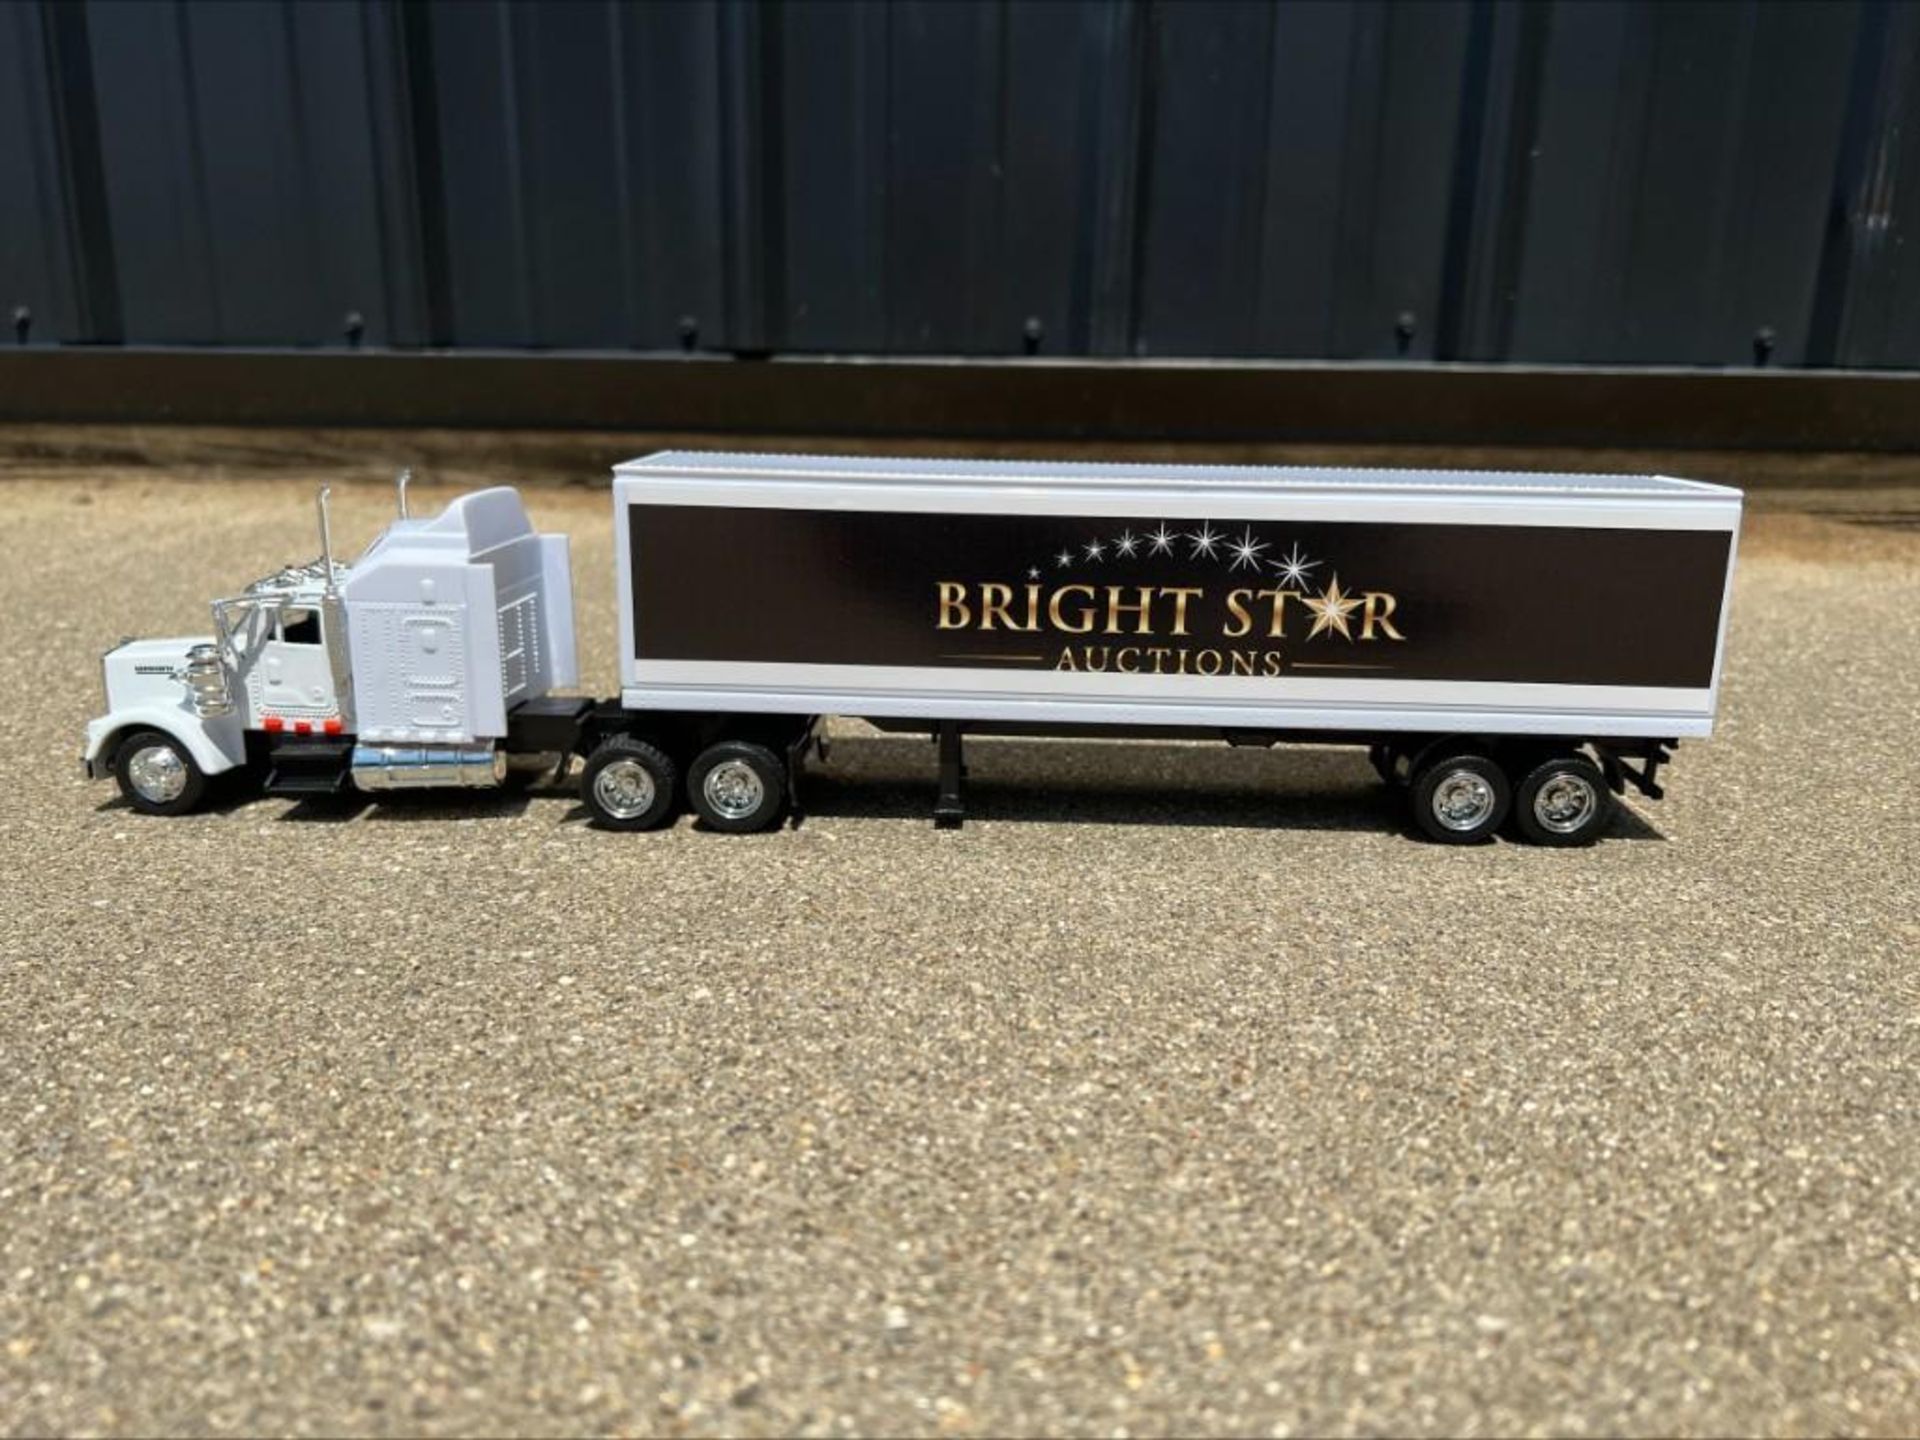 Bright Star Auctions Die-Cast with Plastic 1:43 Scale Truck Replica - Image 2 of 8